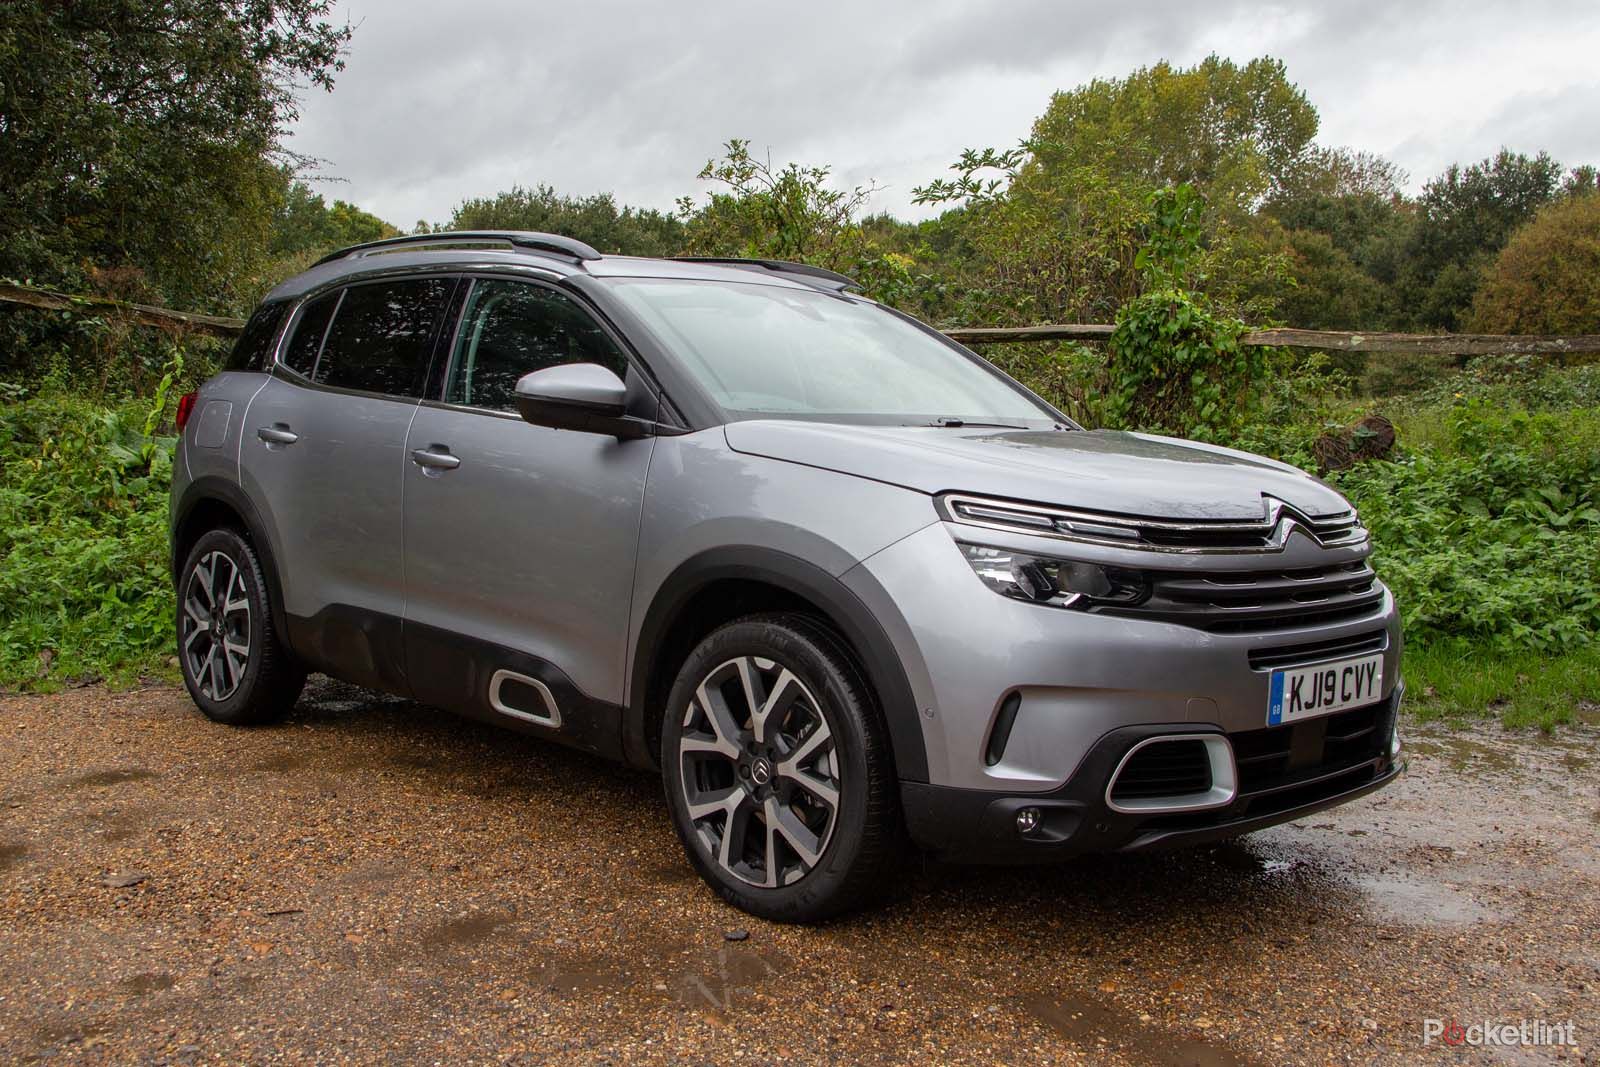 Citroen C5 Aircross review: The family SUV to buy?